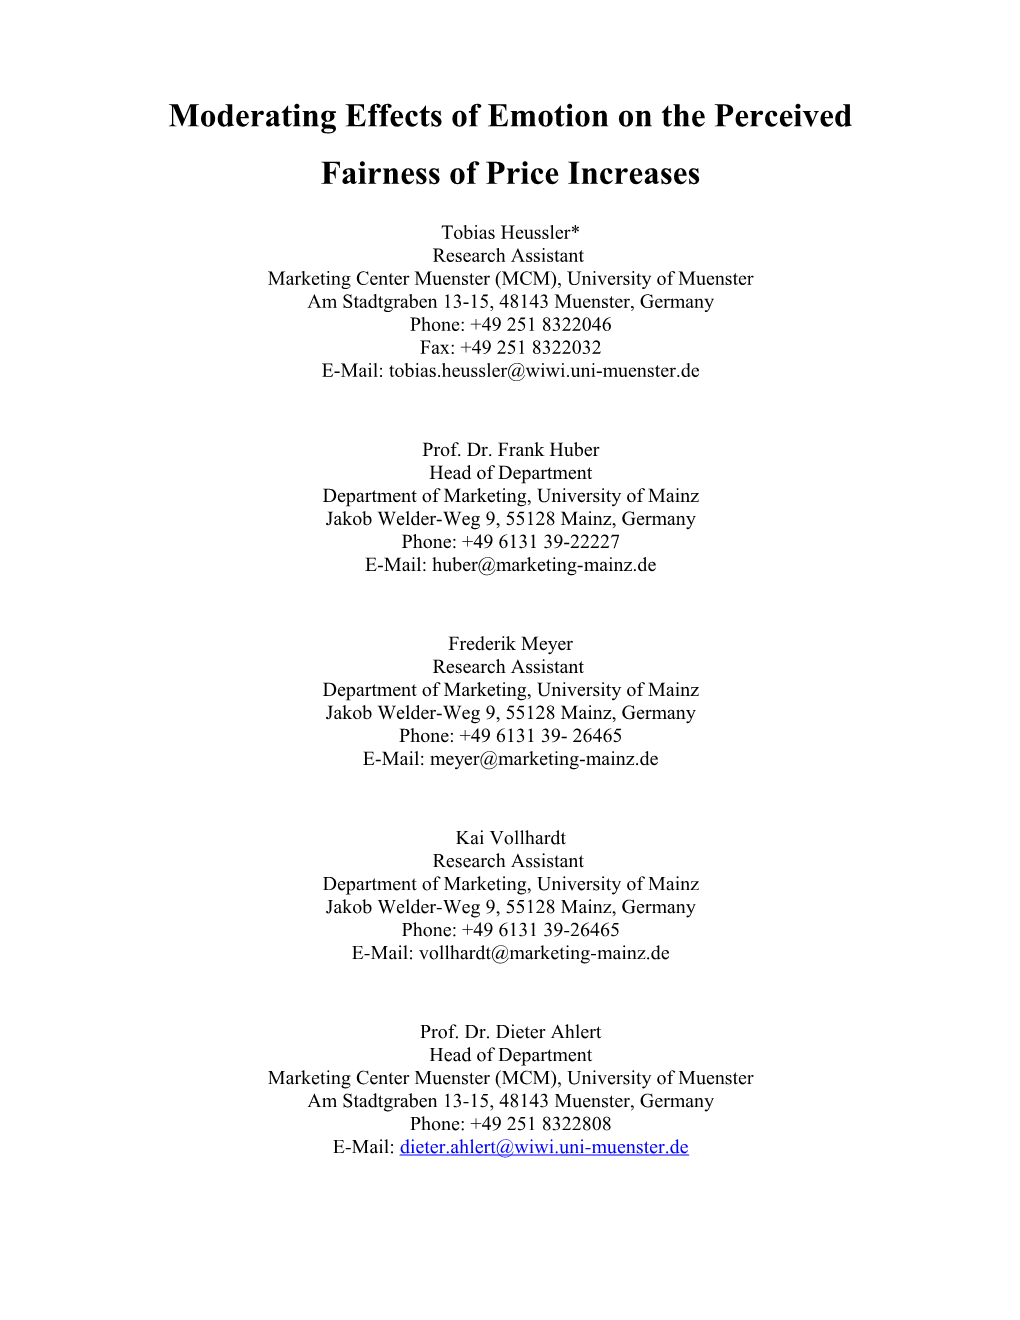 Moderating Effects of Emotion on the Perceived Fairness of Price Increases